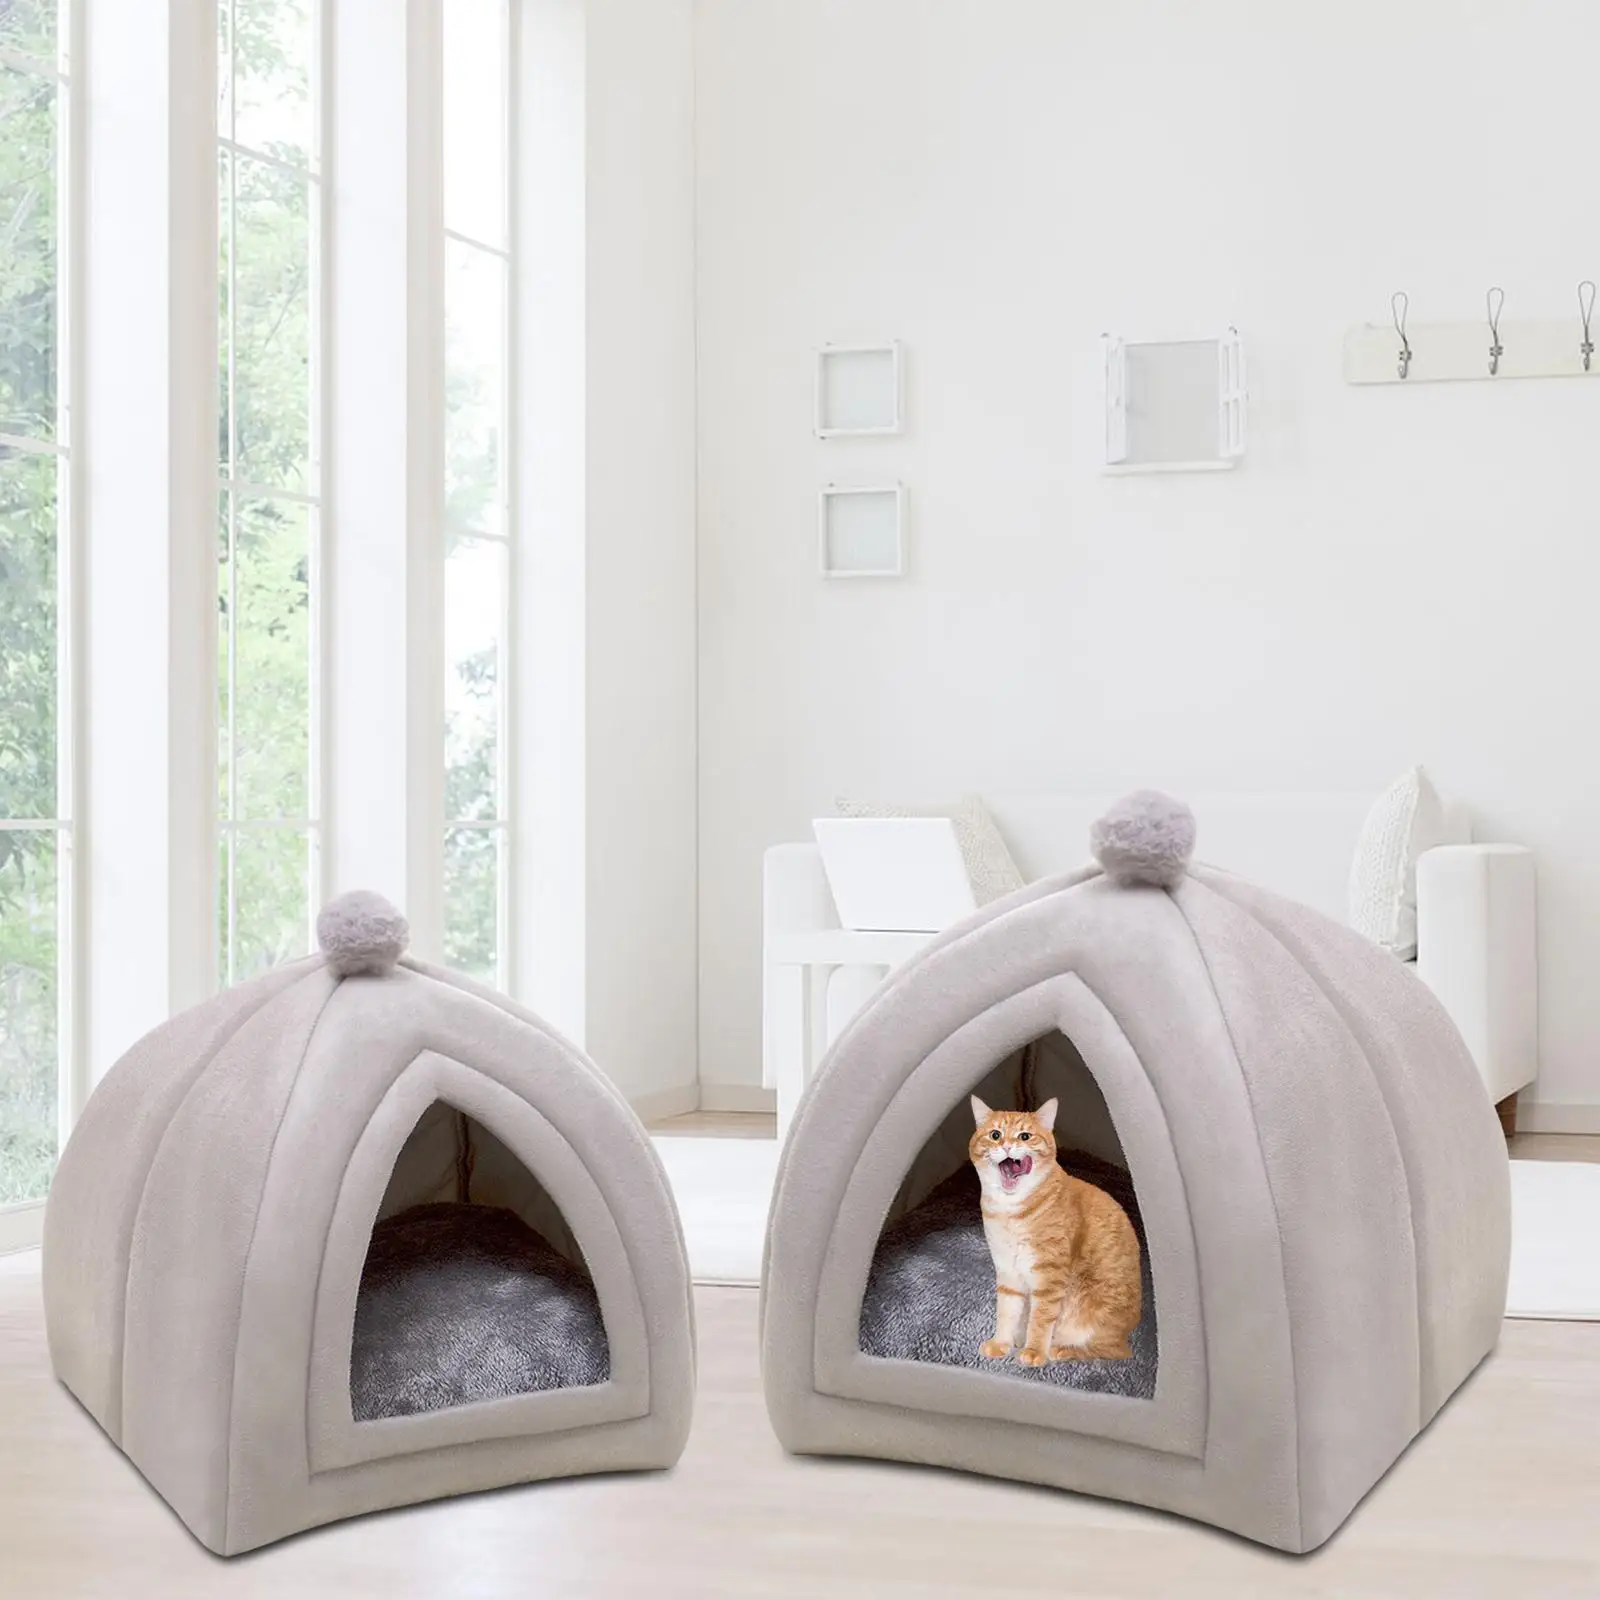 Portable Cat house Nest Cushion Kennel Washable for Puppy Winter Floor